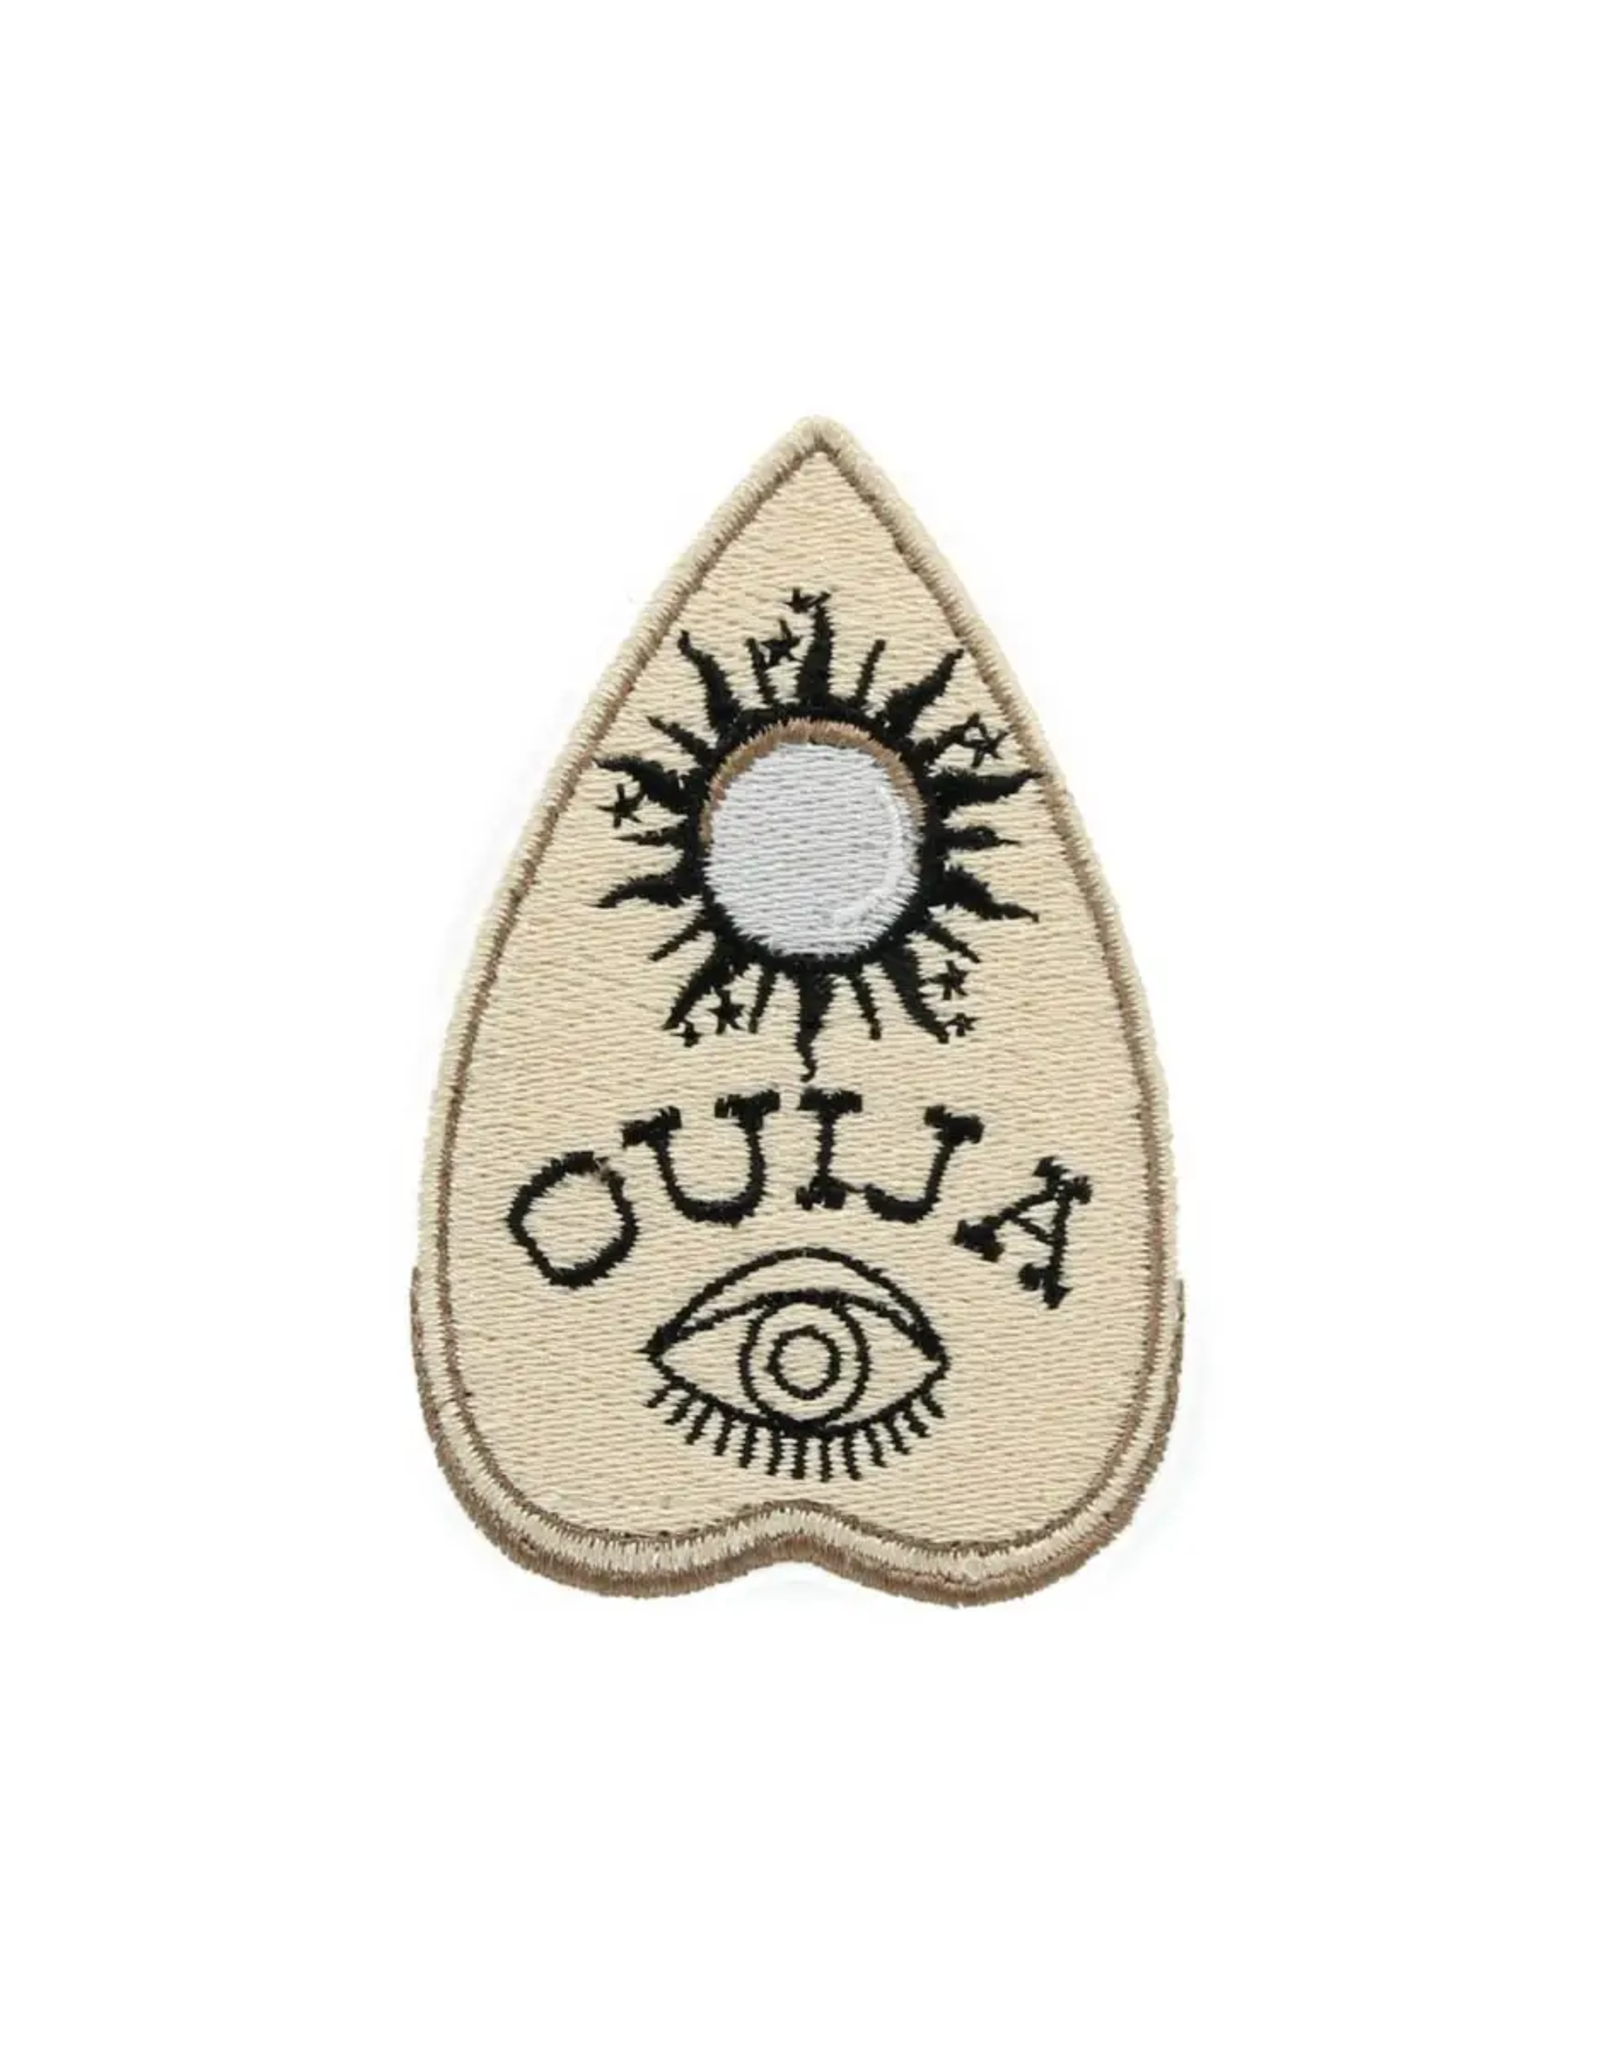 Ouija Planchette Gothic Iron On Embroidered Patch